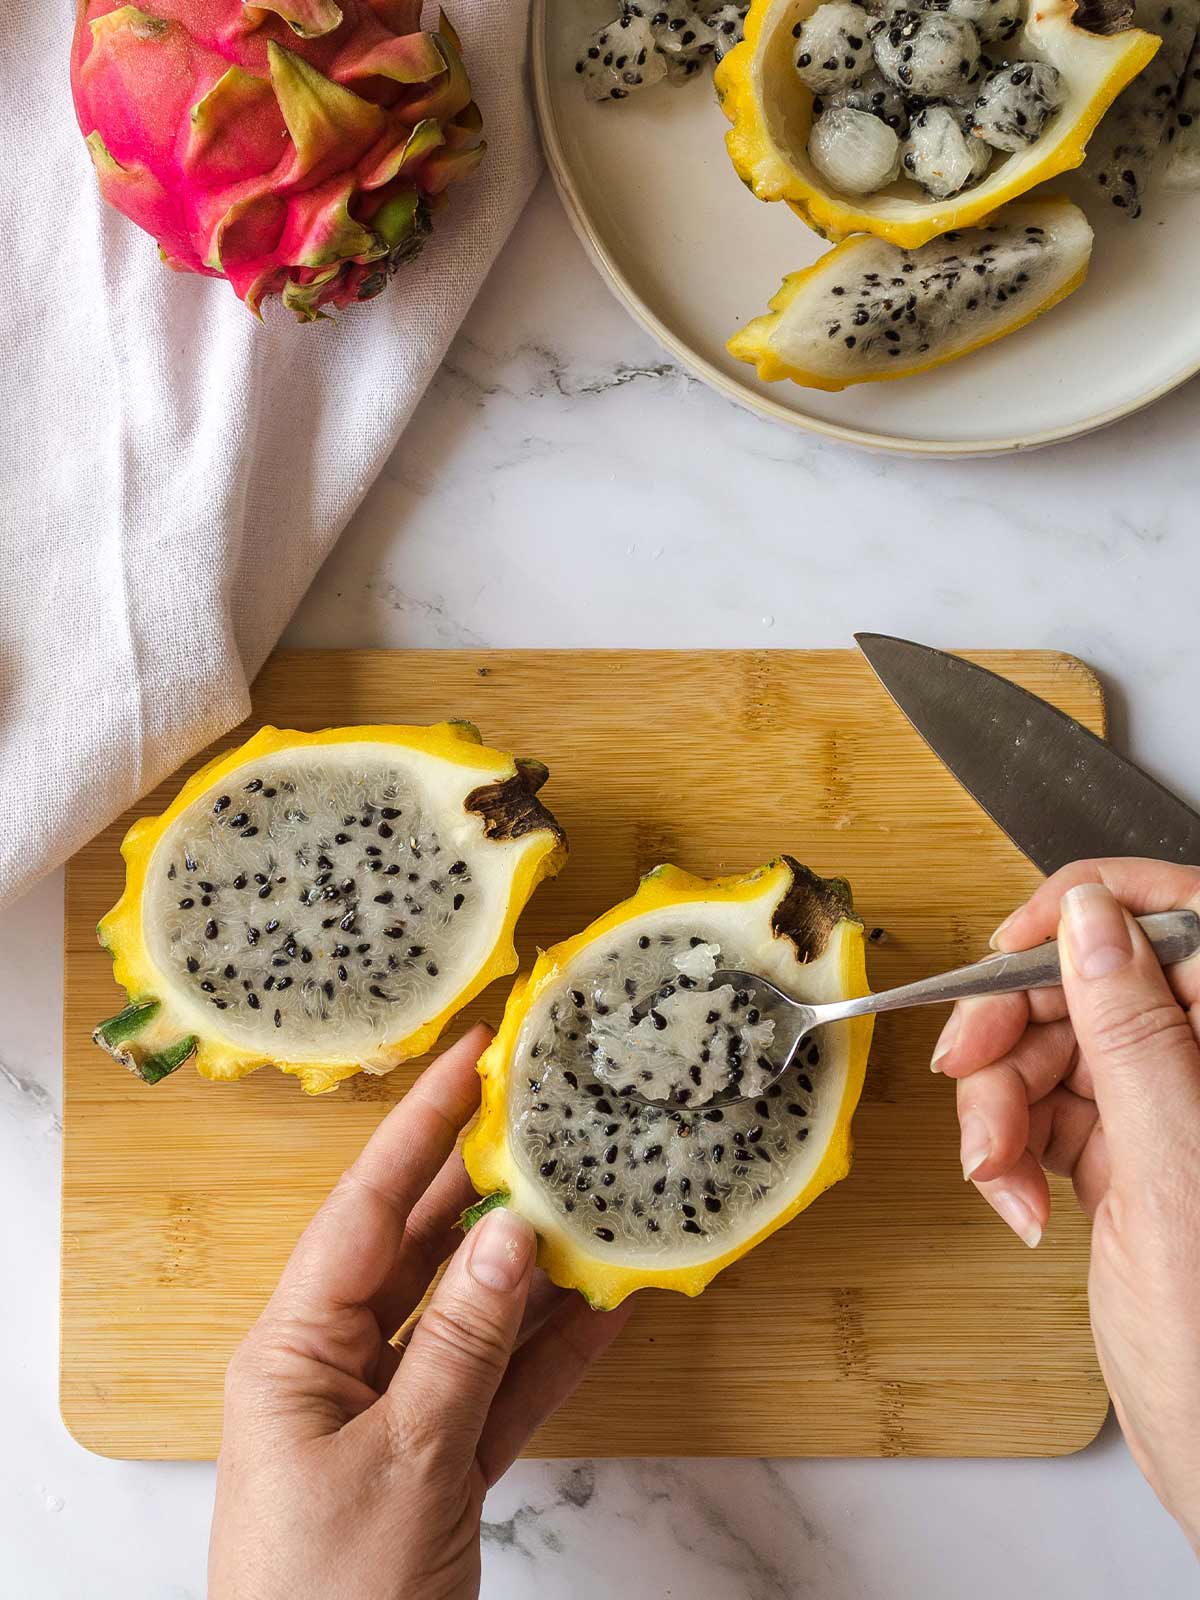 Eating a dragon fruit with a spoon from the cut half of fruit.